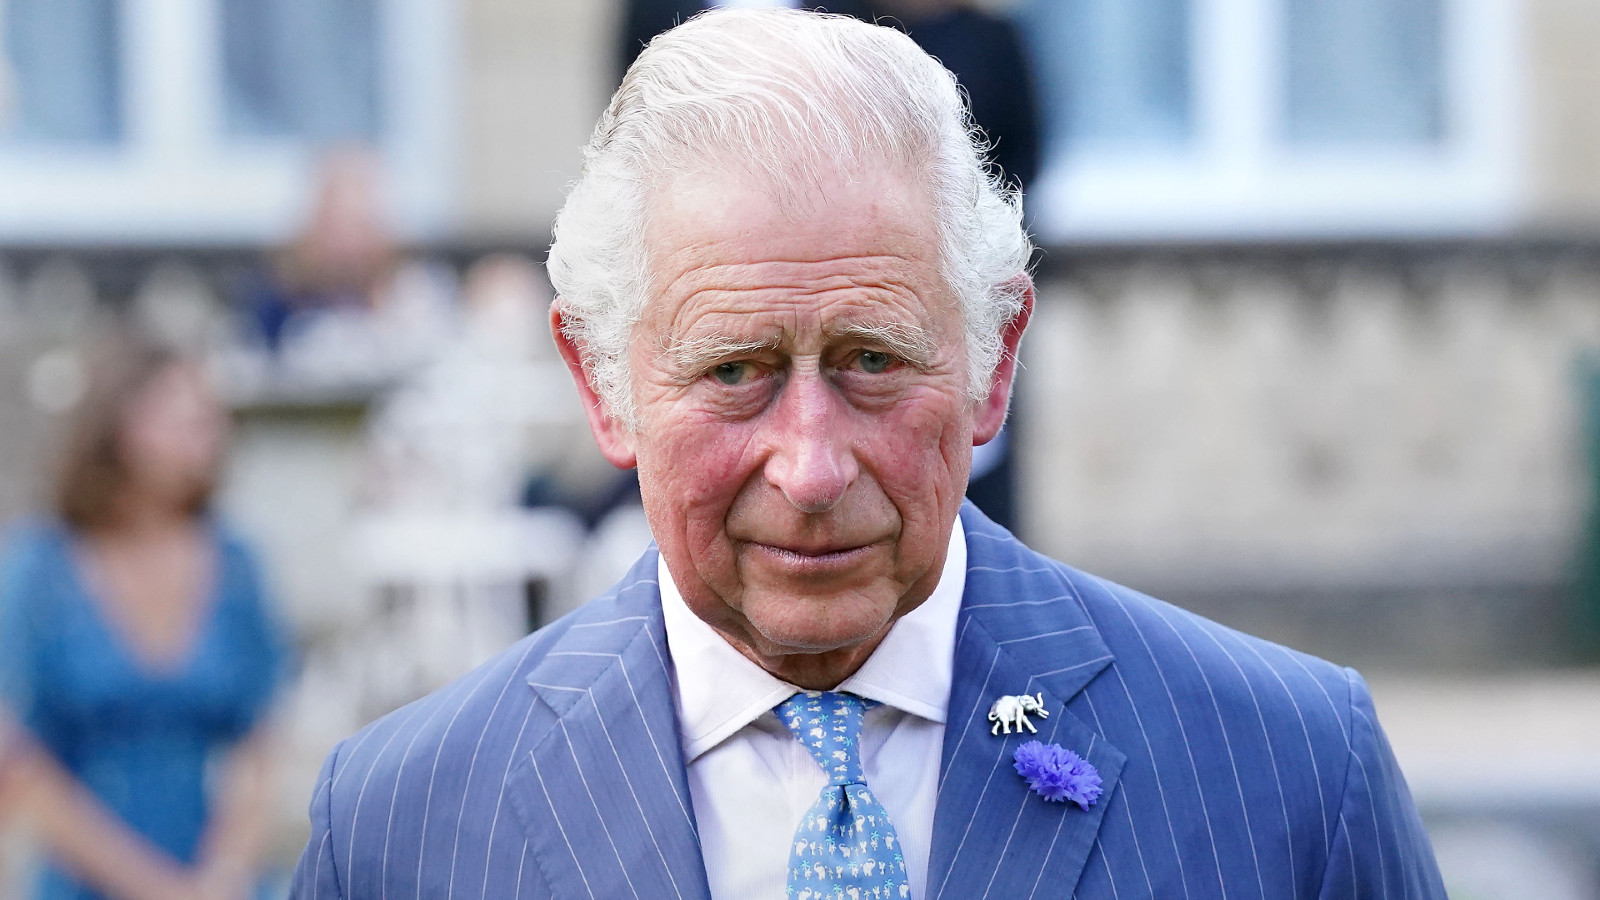 Prince Charles, Prince of Wales attends the "A Starry Night In The Nilgiri Hills" event hosted by the Elephant Family in partnership with the British Asian Trust at Lancaster House on July 14, 2021 in London, England.